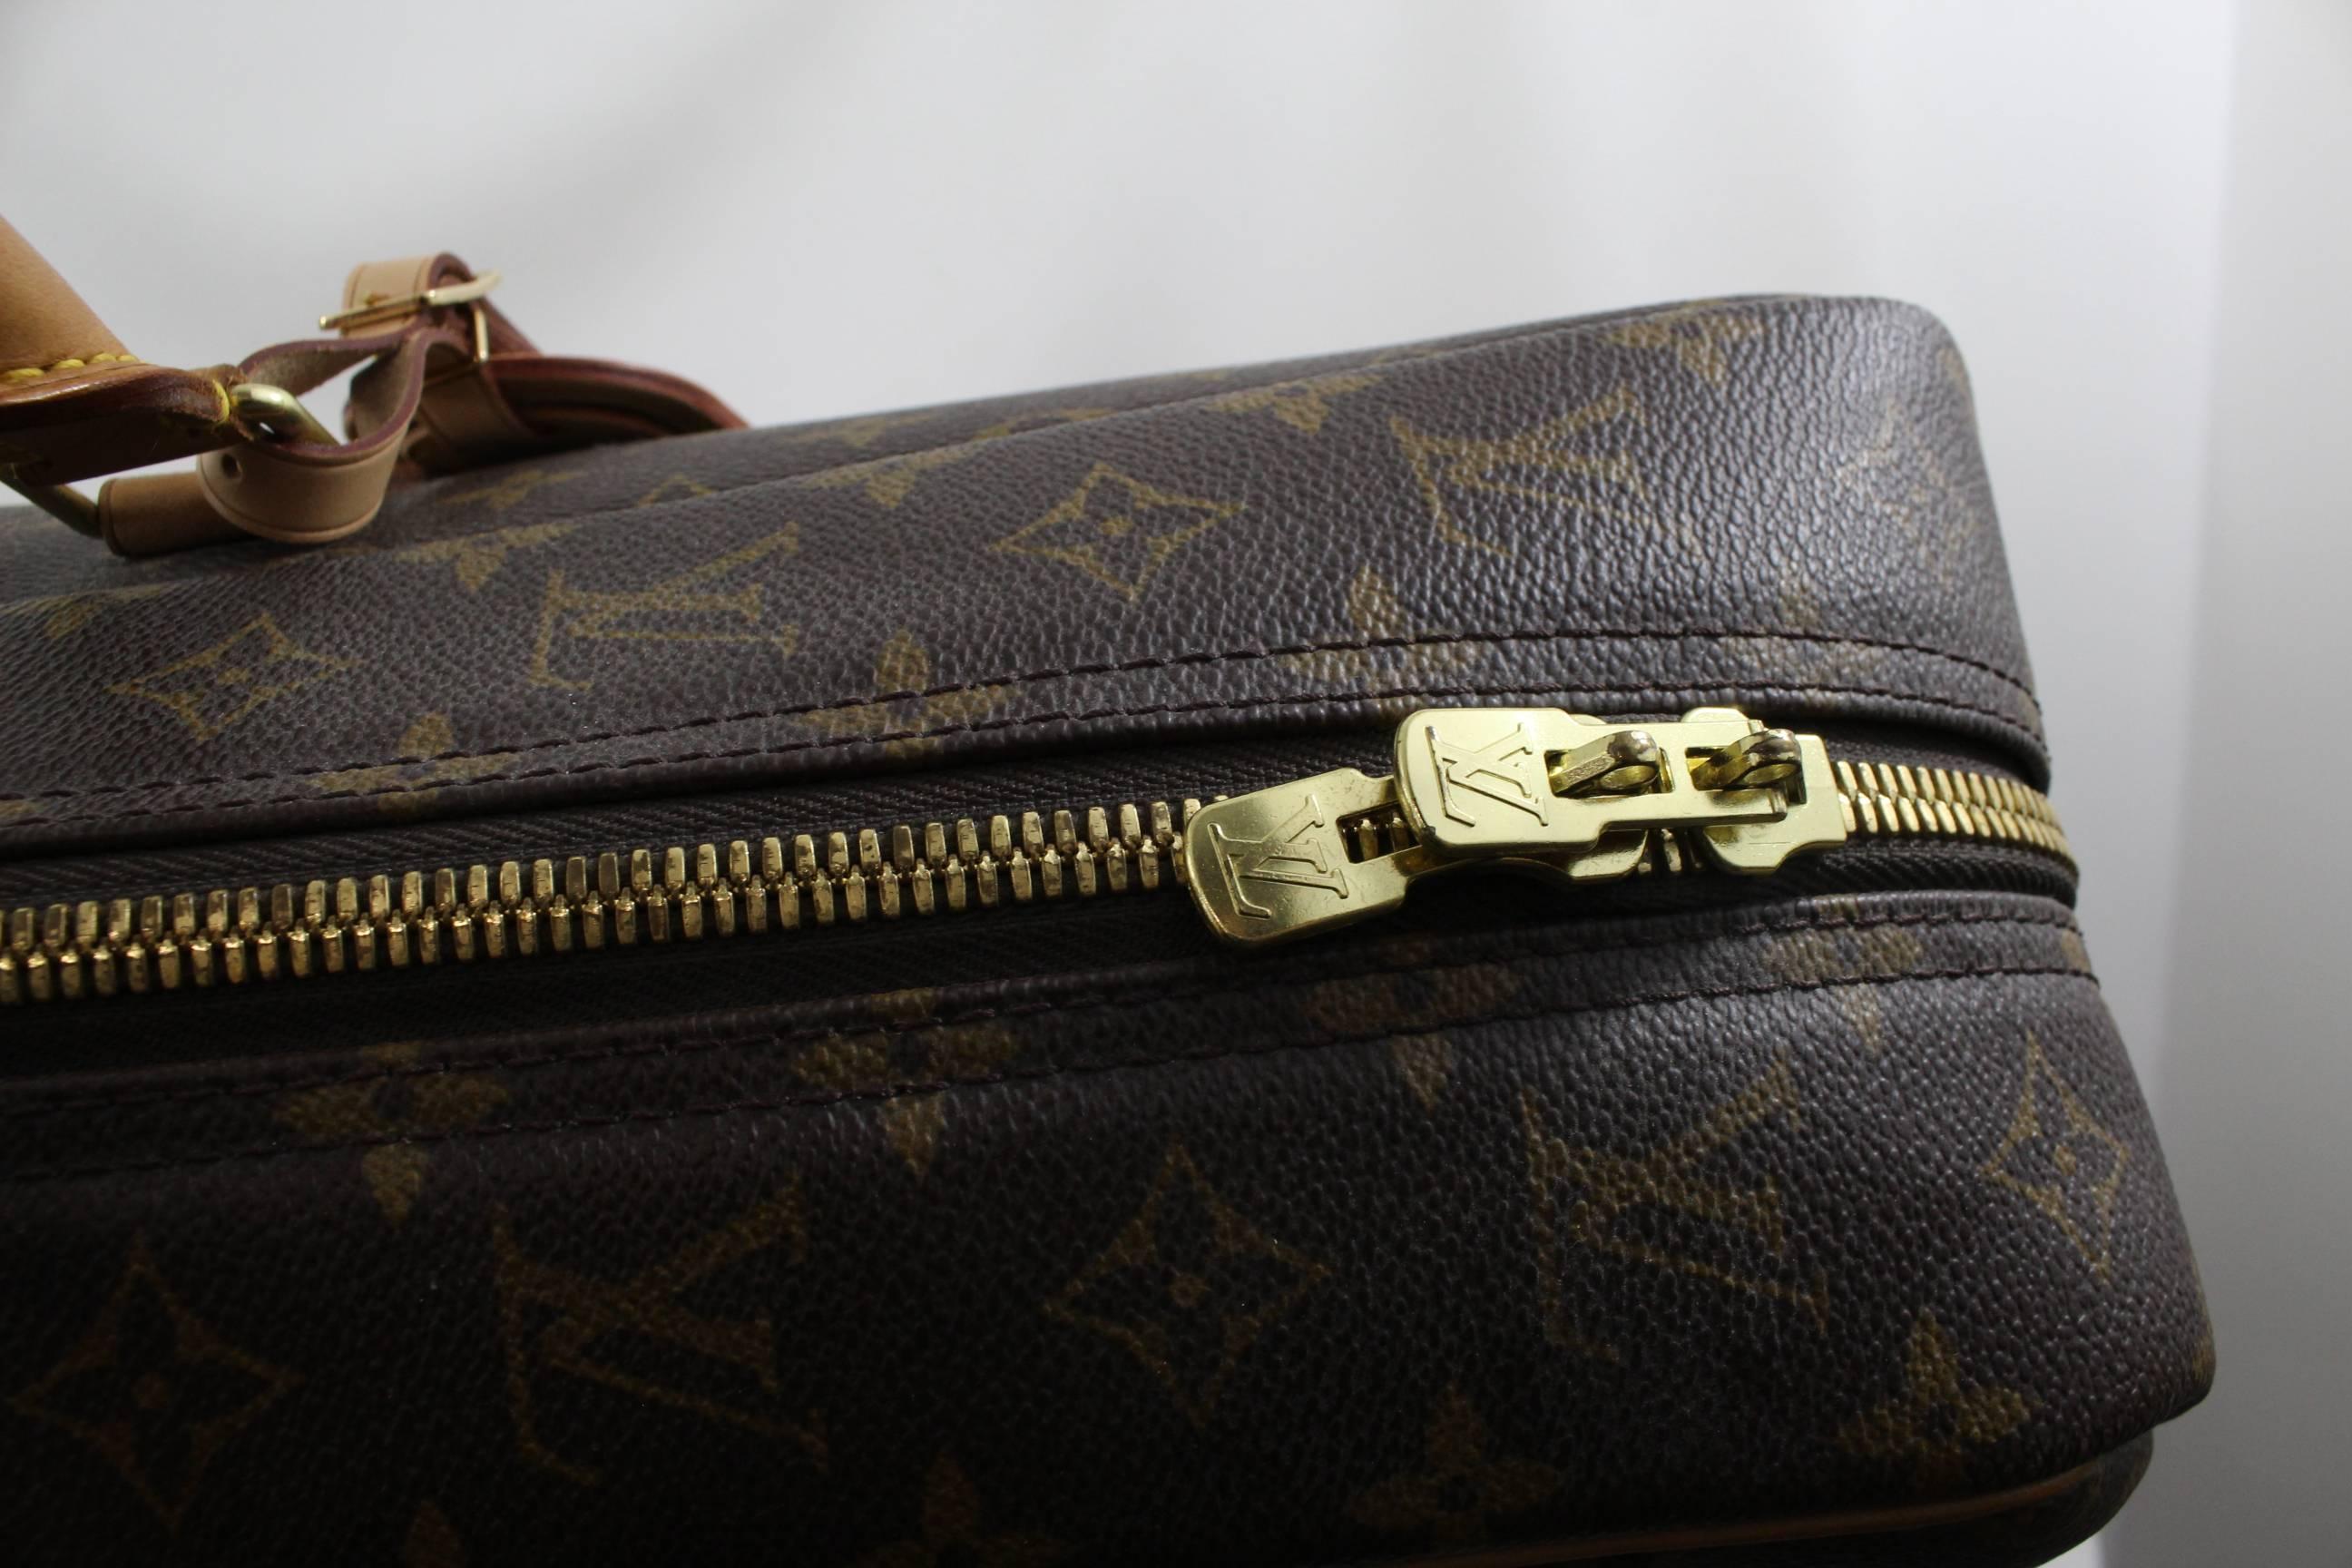 Super nice Louis Vuitton syrius 55 travel suitcase

Size: 21.7 x 16.5 x 7.1 inches 

Good condition, some slight signs of use

Interior really clean

Retail price 2110$